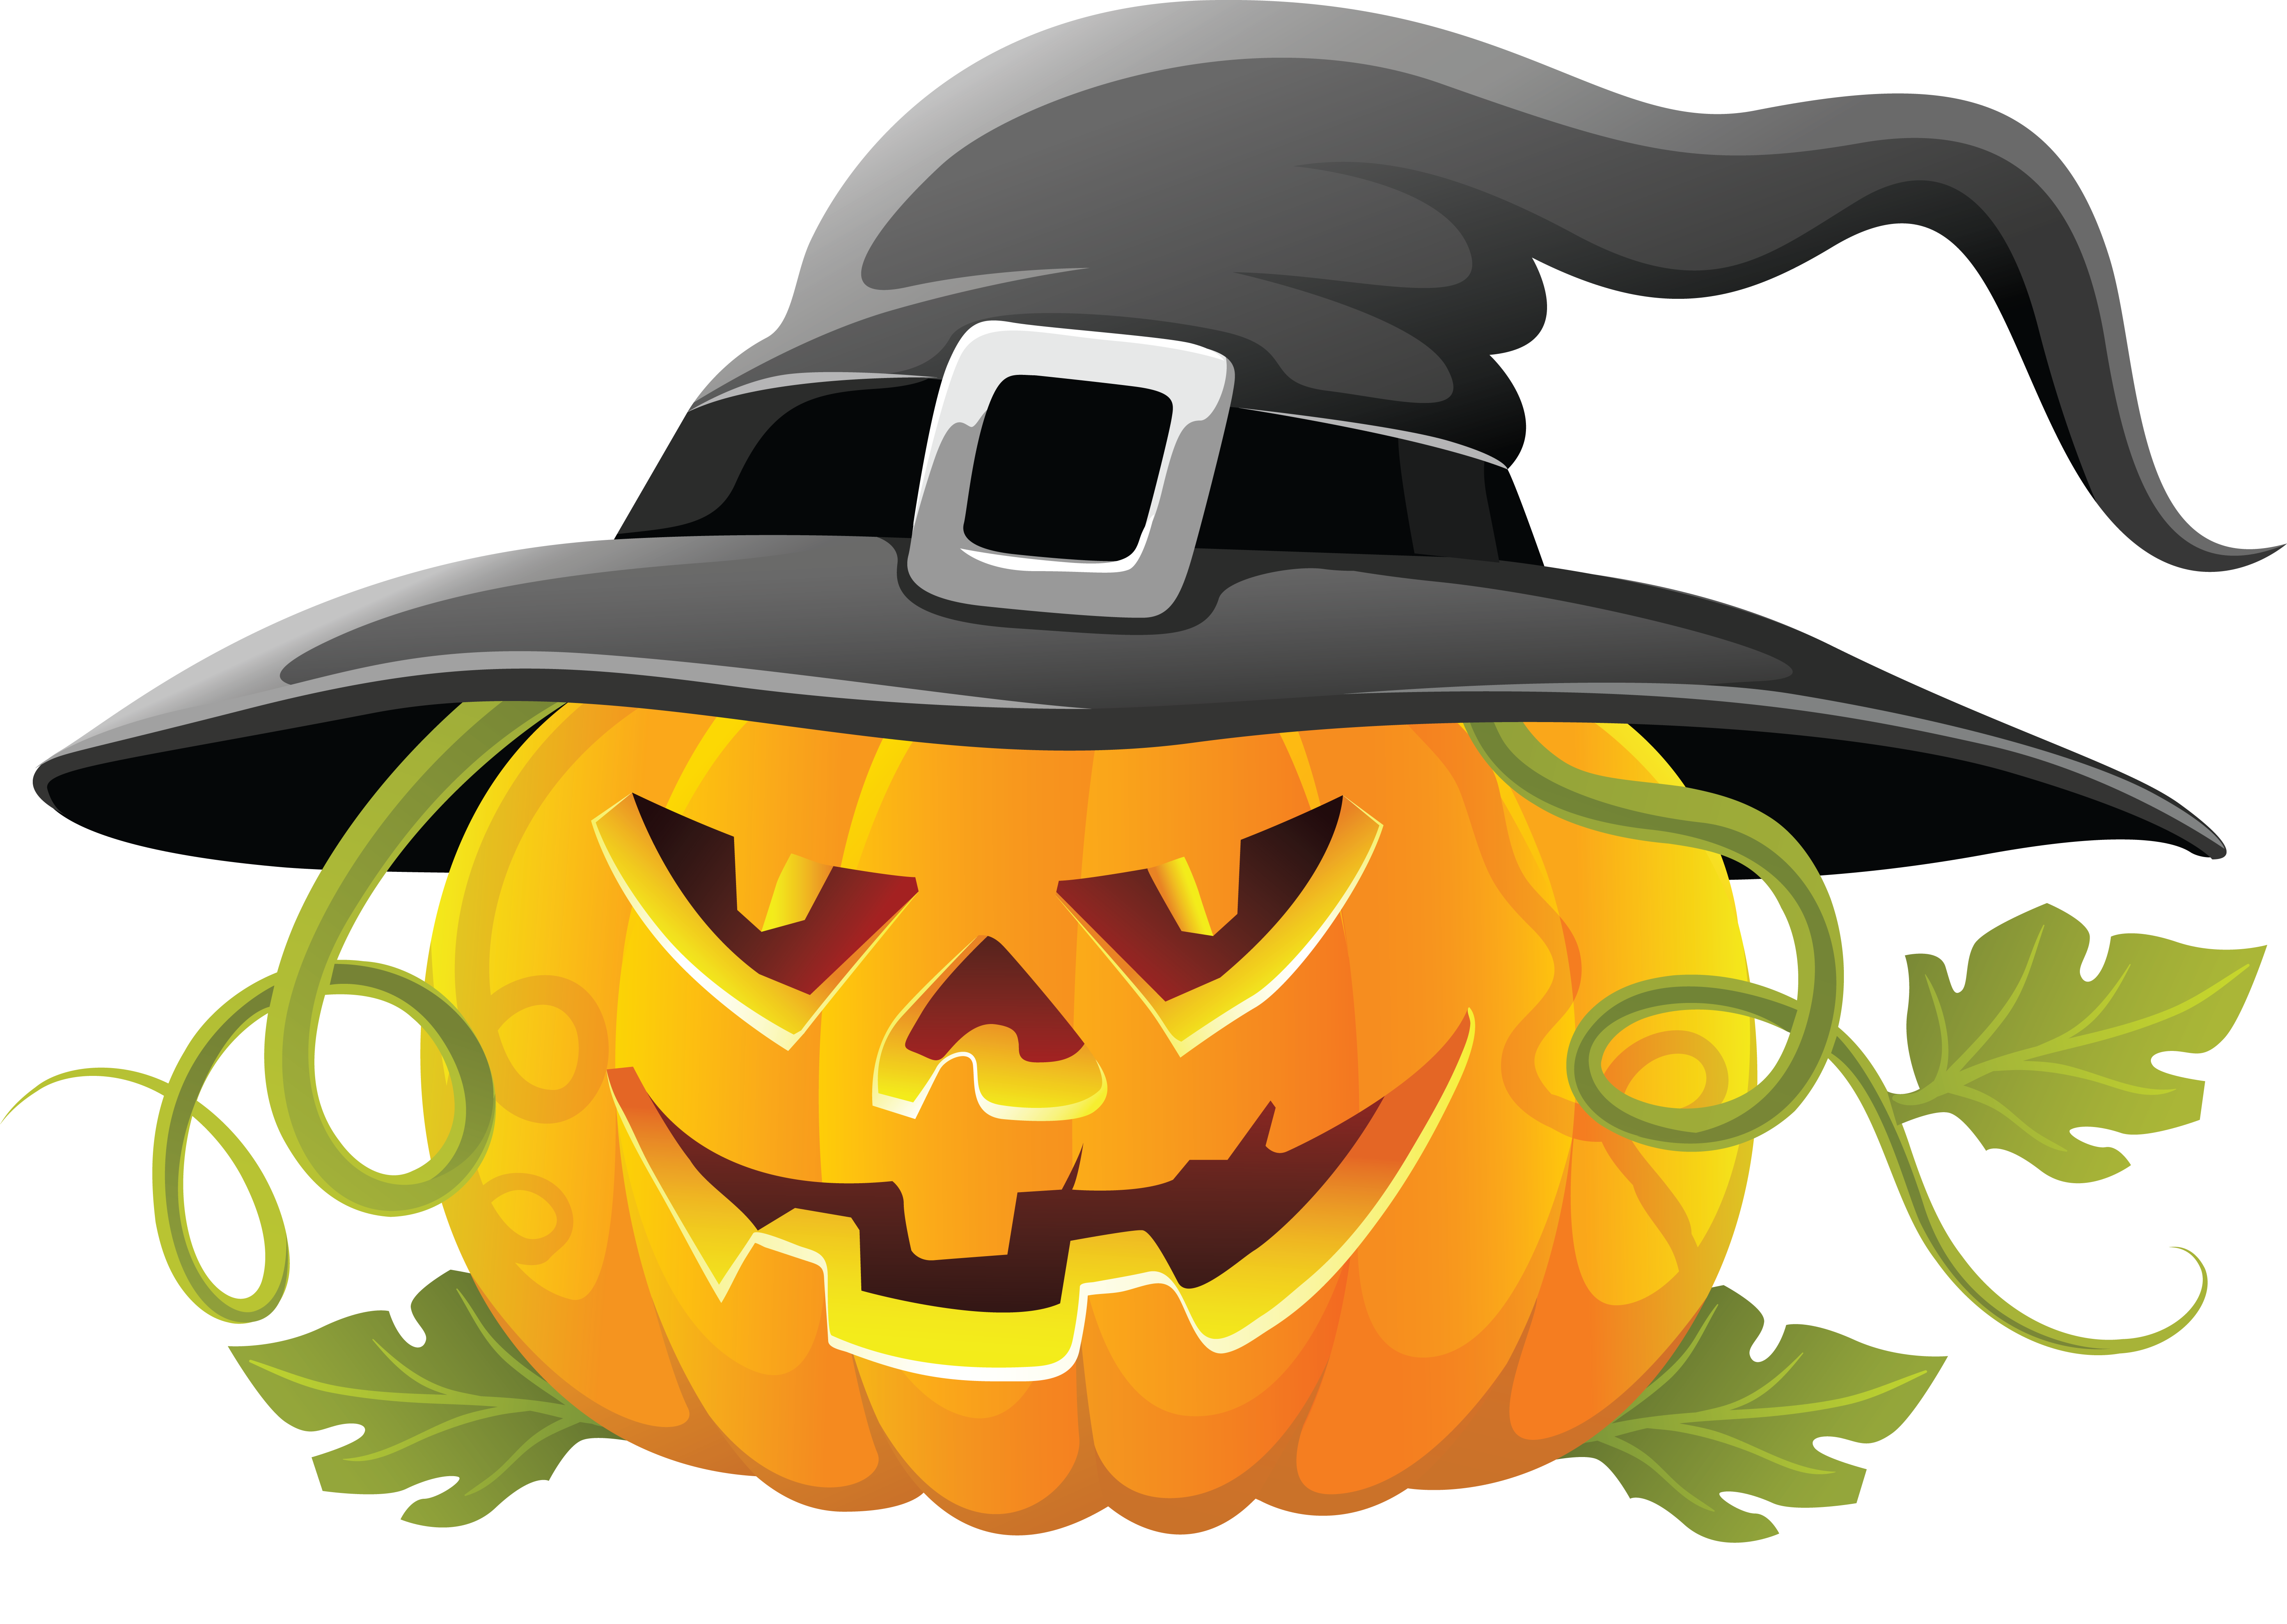 Large_Transparent_Halloween_Pumpkin_with_Witch_Hat_Clipart.png?m=1375135200